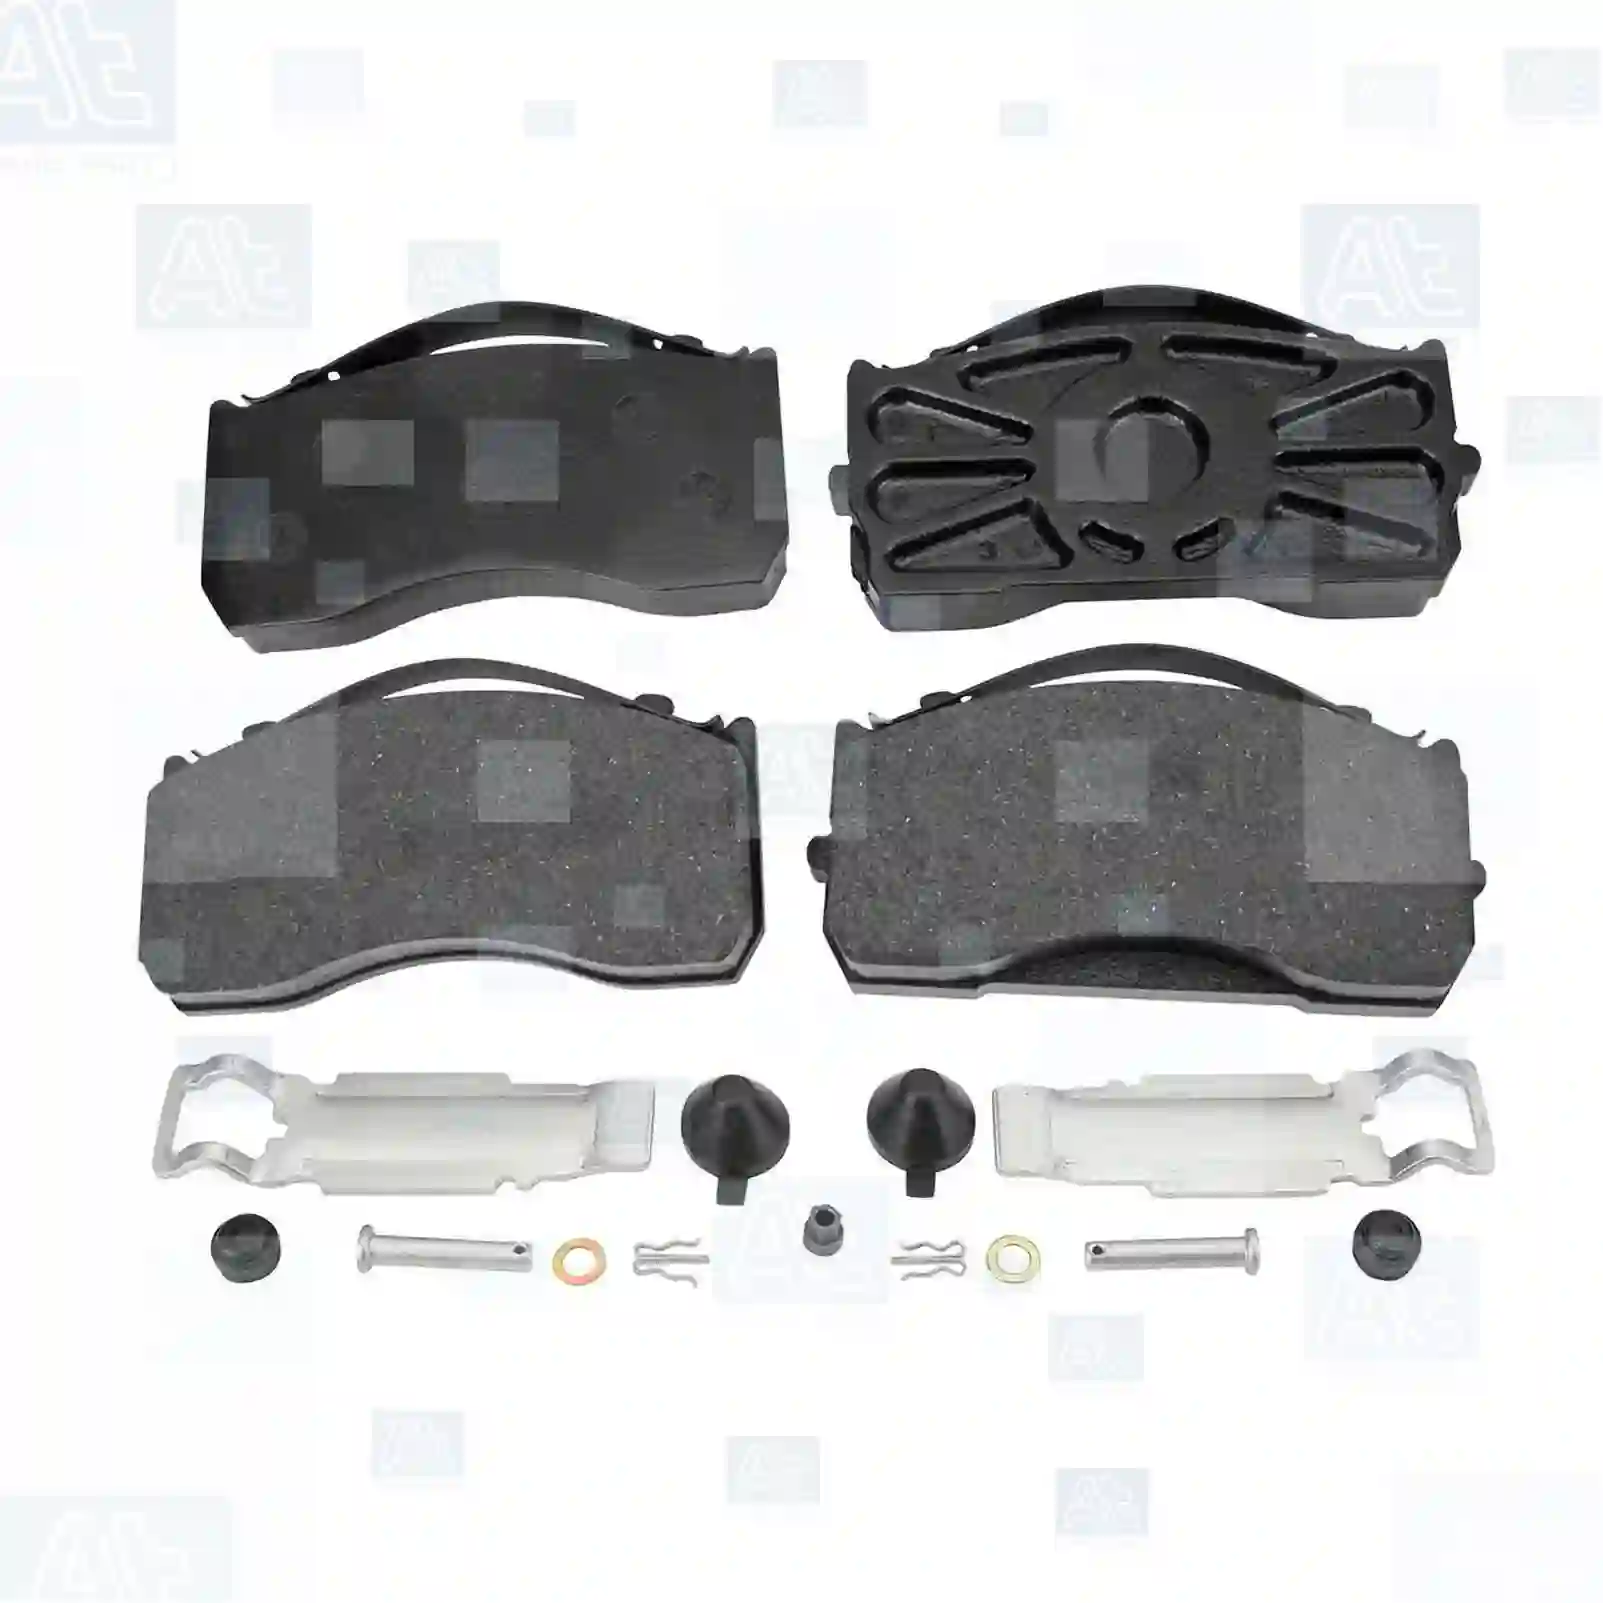 Disc brake pad kit, with accessory kit, 77713652, 0980107070, 1534100, 1962440, 1962595, 709291042, 9291042, 9291045, 9291048, 9291049, 81508205074, 81508206040, 81508206043, 81508206054, 81508206063, 0004211110, 0004211210, 0014210410, 0014210510, 0014210610, 0034201120, 0034201220, 0034206620, 0034207220, 0034207320, 0044206120, 0084206520, 0084206620, 6864200120, ZG50433-0008 ||  77713652 At Spare Part | Engine, Accelerator Pedal, Camshaft, Connecting Rod, Crankcase, Crankshaft, Cylinder Head, Engine Suspension Mountings, Exhaust Manifold, Exhaust Gas Recirculation, Filter Kits, Flywheel Housing, General Overhaul Kits, Engine, Intake Manifold, Oil Cleaner, Oil Cooler, Oil Filter, Oil Pump, Oil Sump, Piston & Liner, Sensor & Switch, Timing Case, Turbocharger, Cooling System, Belt Tensioner, Coolant Filter, Coolant Pipe, Corrosion Prevention Agent, Drive, Expansion Tank, Fan, Intercooler, Monitors & Gauges, Radiator, Thermostat, V-Belt / Timing belt, Water Pump, Fuel System, Electronical Injector Unit, Feed Pump, Fuel Filter, cpl., Fuel Gauge Sender,  Fuel Line, Fuel Pump, Fuel Tank, Injection Line Kit, Injection Pump, Exhaust System, Clutch & Pedal, Gearbox, Propeller Shaft, Axles, Brake System, Hubs & Wheels, Suspension, Leaf Spring, Universal Parts / Accessories, Steering, Electrical System, Cabin Disc brake pad kit, with accessory kit, 77713652, 0980107070, 1534100, 1962440, 1962595, 709291042, 9291042, 9291045, 9291048, 9291049, 81508205074, 81508206040, 81508206043, 81508206054, 81508206063, 0004211110, 0004211210, 0014210410, 0014210510, 0014210610, 0034201120, 0034201220, 0034206620, 0034207220, 0034207320, 0044206120, 0084206520, 0084206620, 6864200120, ZG50433-0008 ||  77713652 At Spare Part | Engine, Accelerator Pedal, Camshaft, Connecting Rod, Crankcase, Crankshaft, Cylinder Head, Engine Suspension Mountings, Exhaust Manifold, Exhaust Gas Recirculation, Filter Kits, Flywheel Housing, General Overhaul Kits, Engine, Intake Manifold, Oil Cleaner, Oil Cooler, Oil Filter, Oil Pump, Oil Sump, Piston & Liner, Sensor & Switch, Timing Case, Turbocharger, Cooling System, Belt Tensioner, Coolant Filter, Coolant Pipe, Corrosion Prevention Agent, Drive, Expansion Tank, Fan, Intercooler, Monitors & Gauges, Radiator, Thermostat, V-Belt / Timing belt, Water Pump, Fuel System, Electronical Injector Unit, Feed Pump, Fuel Filter, cpl., Fuel Gauge Sender,  Fuel Line, Fuel Pump, Fuel Tank, Injection Line Kit, Injection Pump, Exhaust System, Clutch & Pedal, Gearbox, Propeller Shaft, Axles, Brake System, Hubs & Wheels, Suspension, Leaf Spring, Universal Parts / Accessories, Steering, Electrical System, Cabin